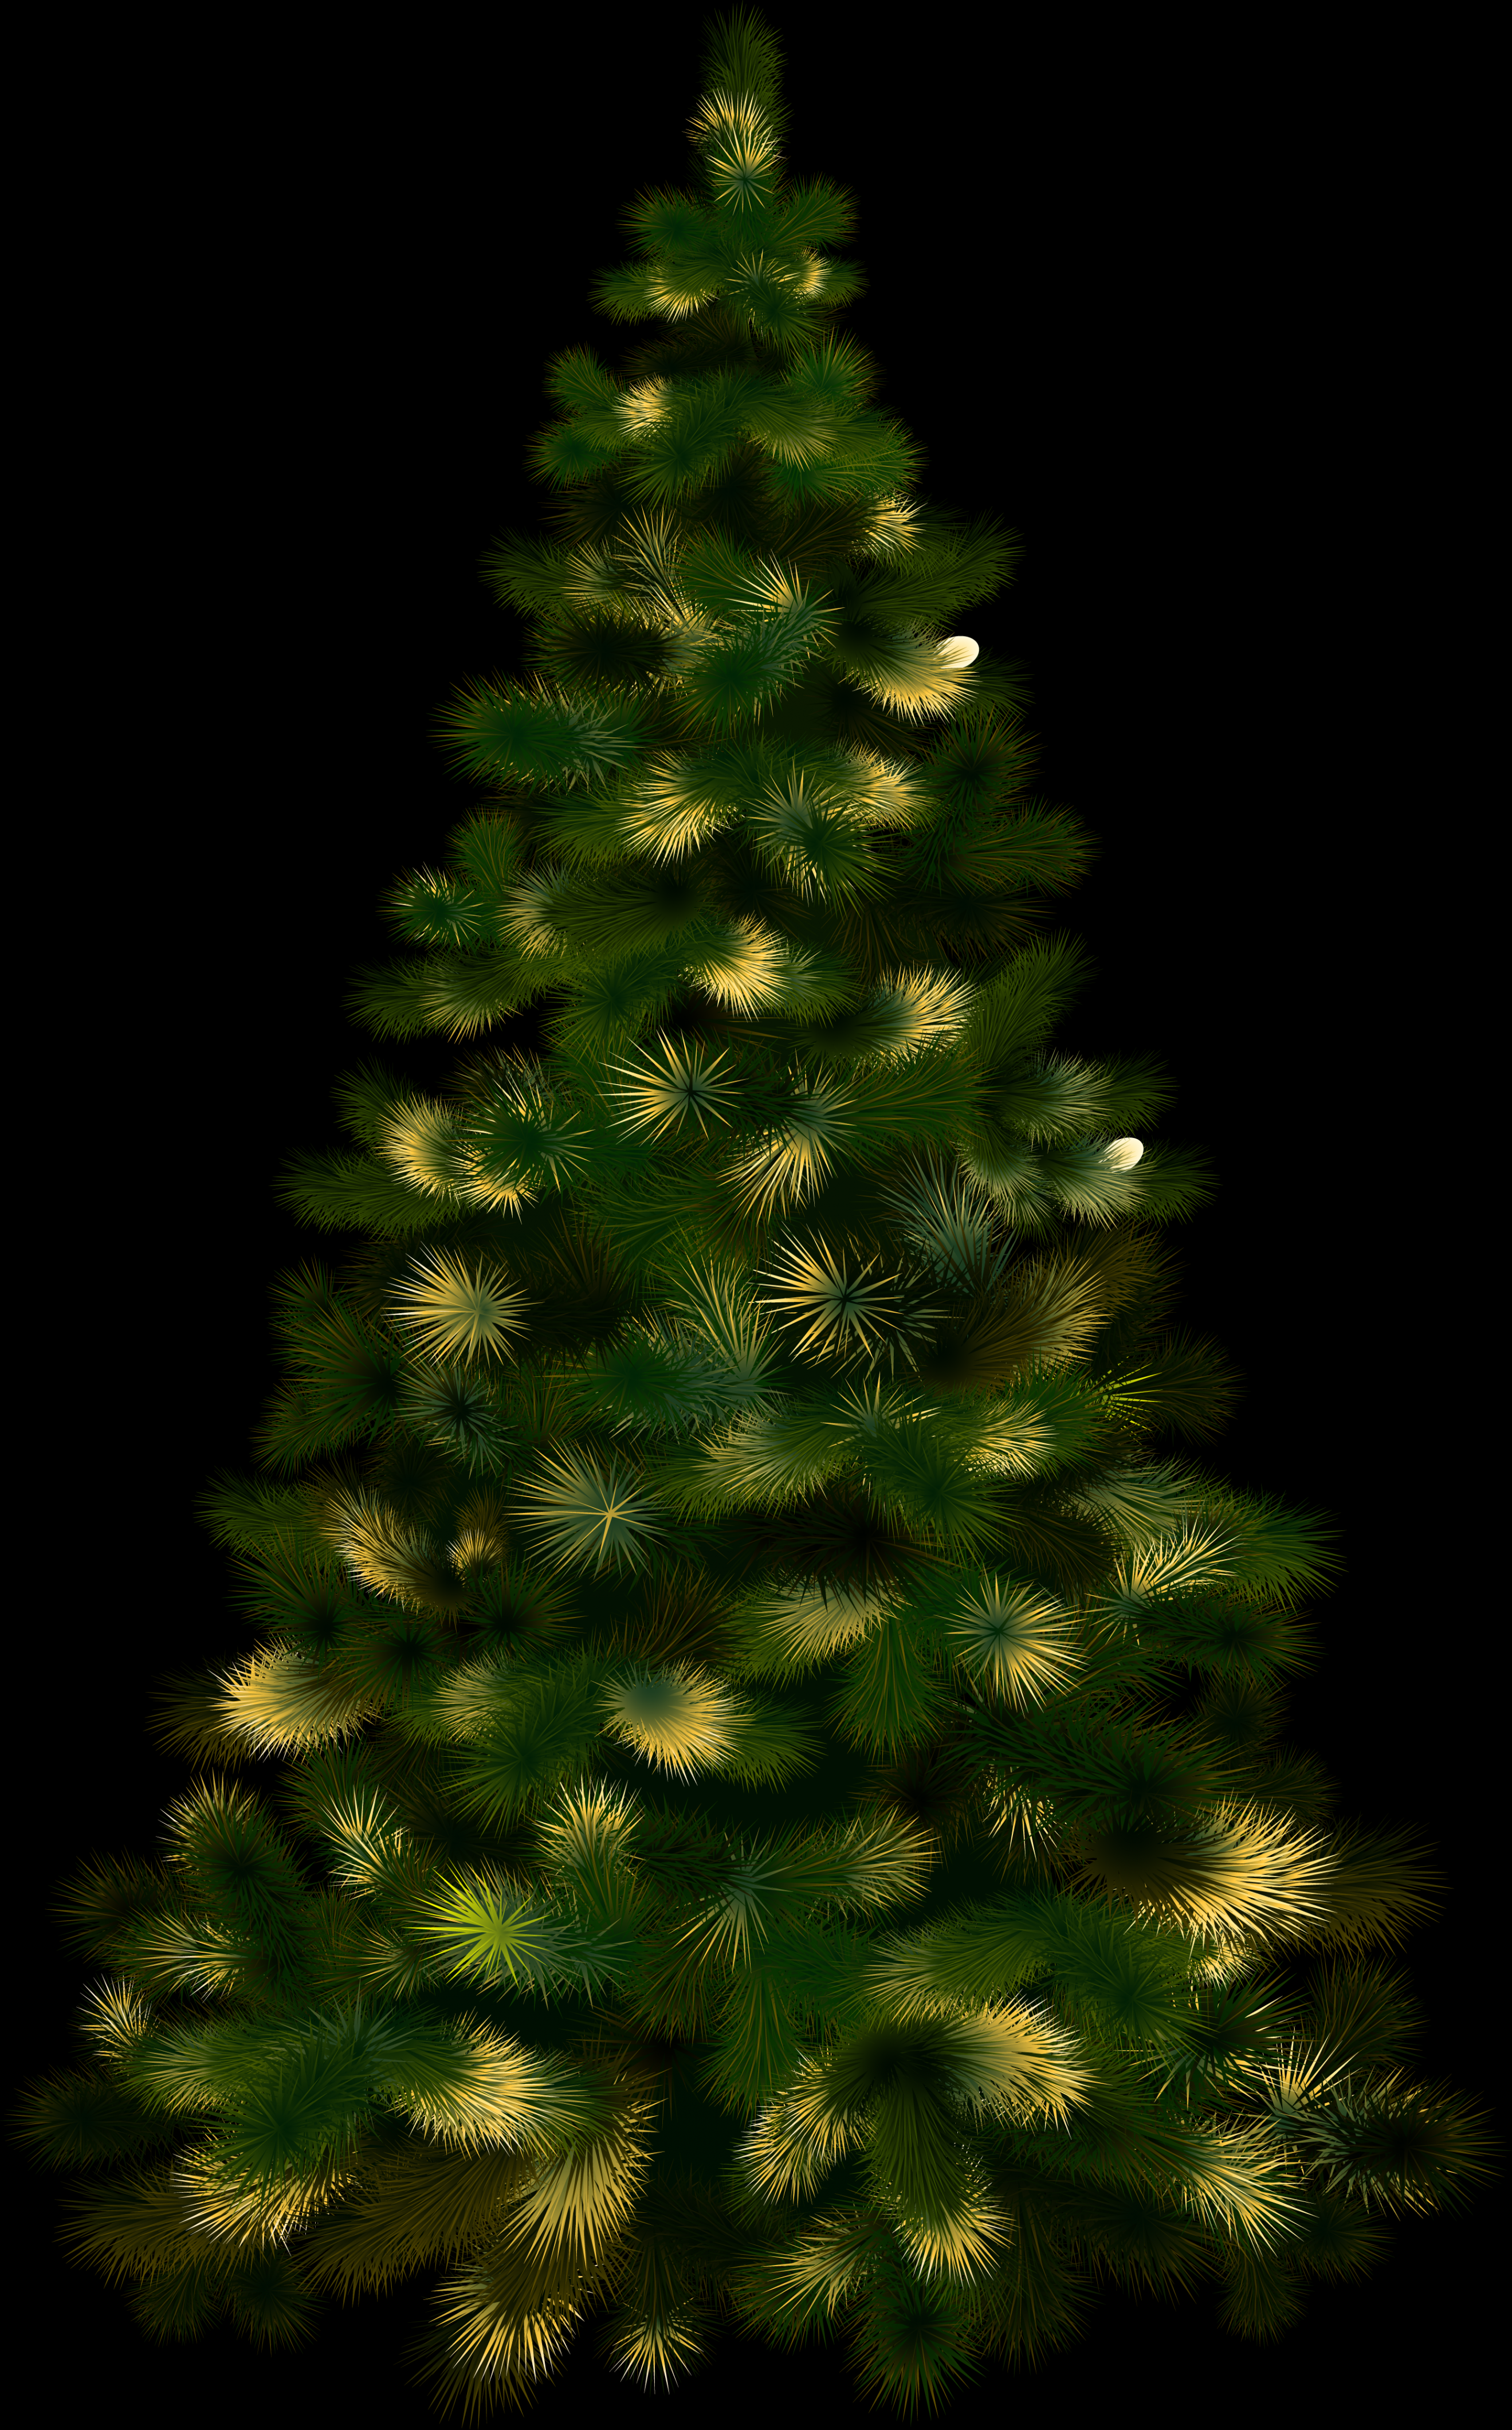 Download Christmas Tree without Lights PNG Image for Free